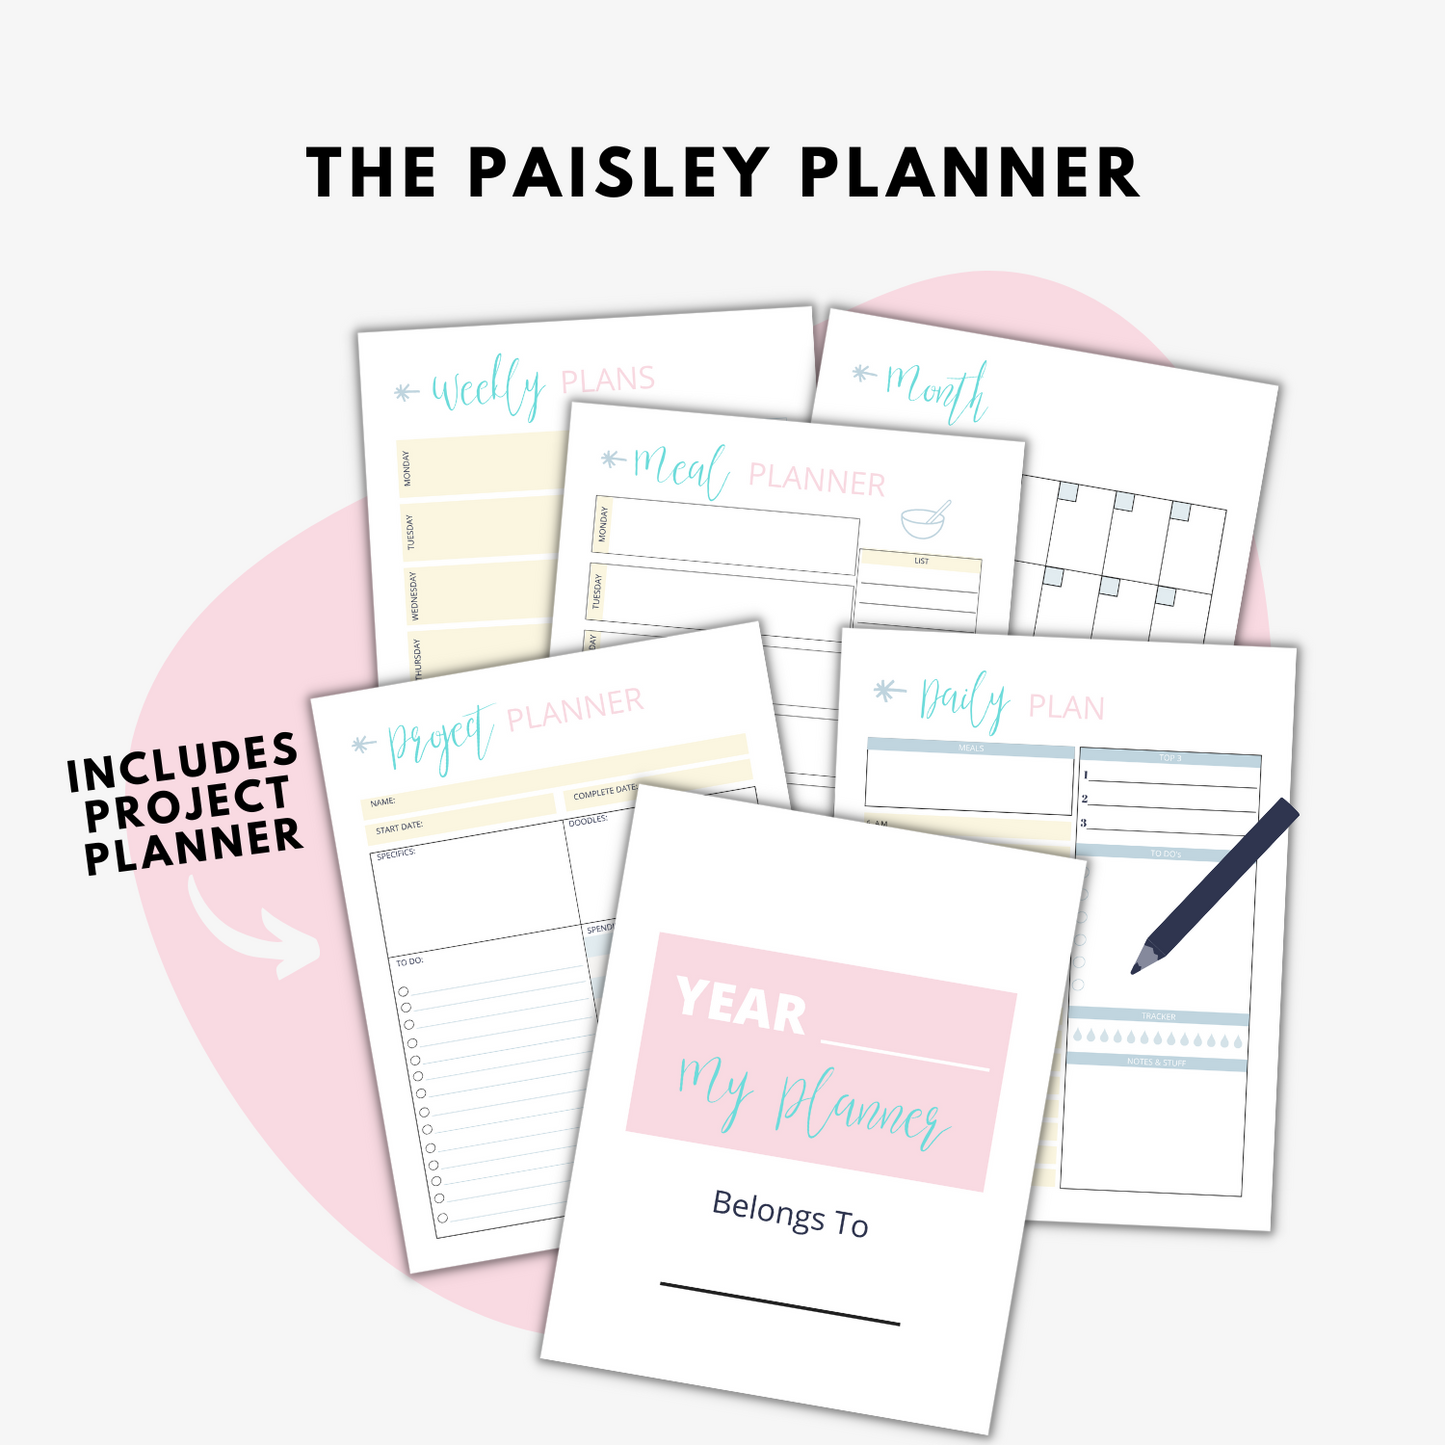 The Paisley Planner